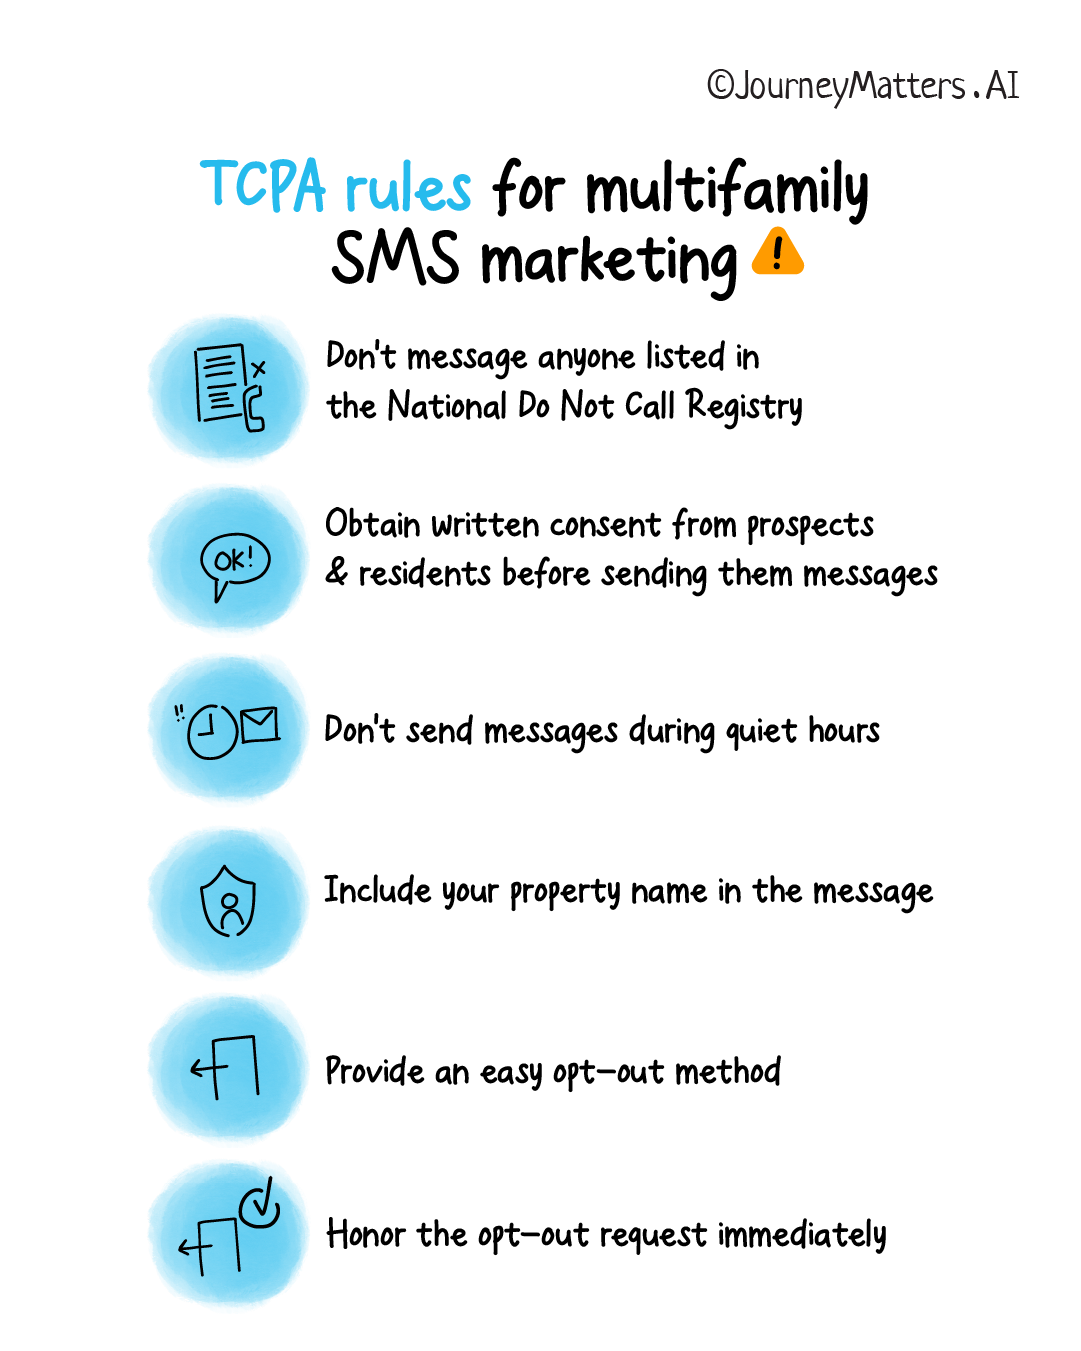 TCPA rules for multifamily SMS marketing 